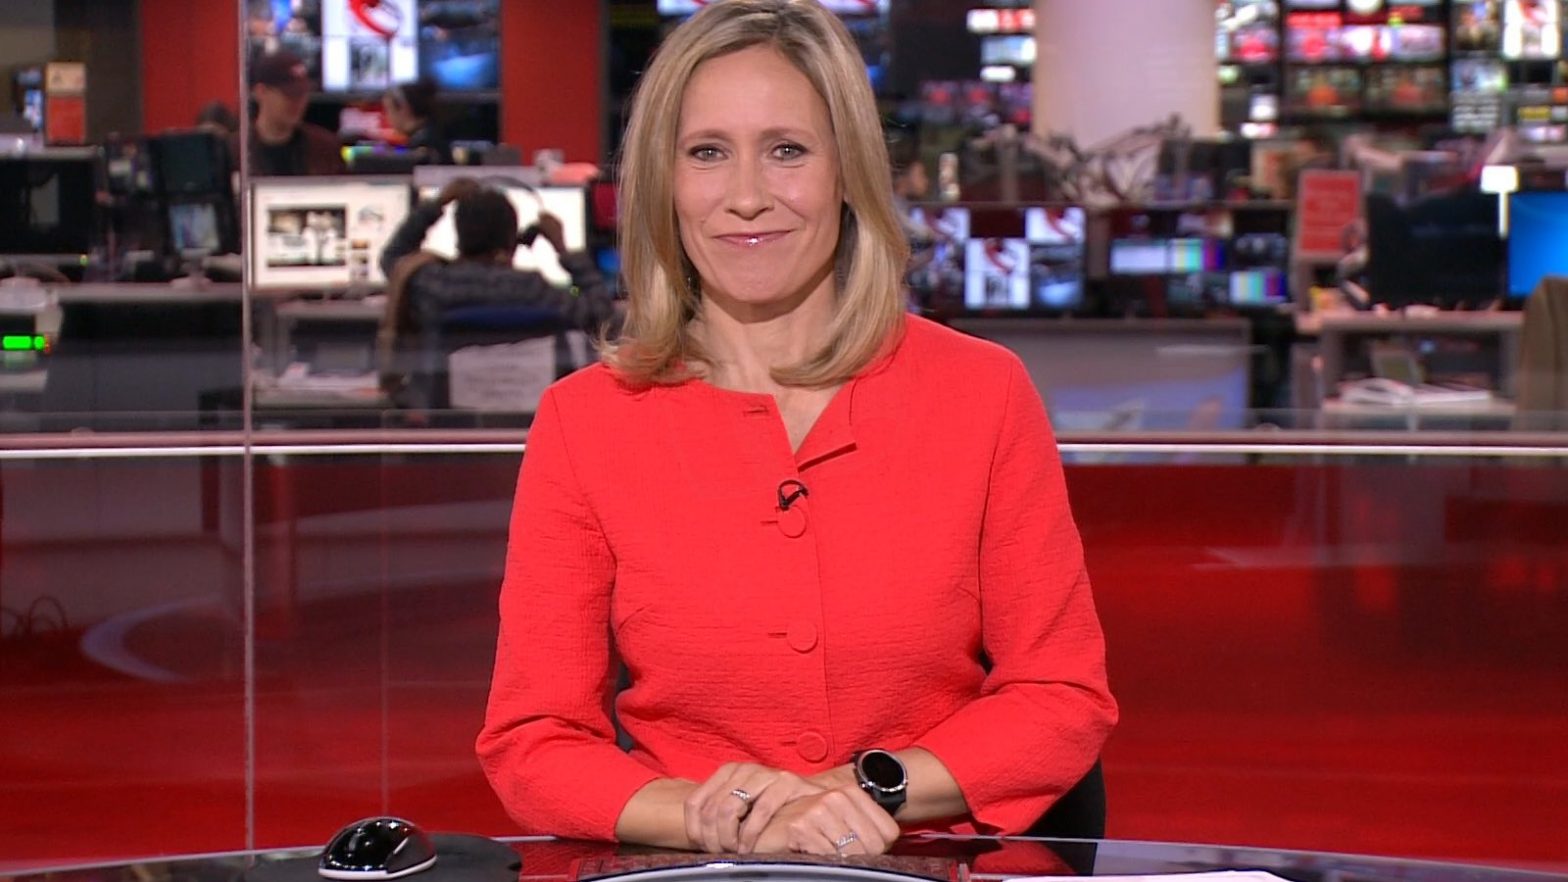 BBC presenter Sophie Raworth mistakenly says Huw Edwards has resigned, clarifies later | Watch video